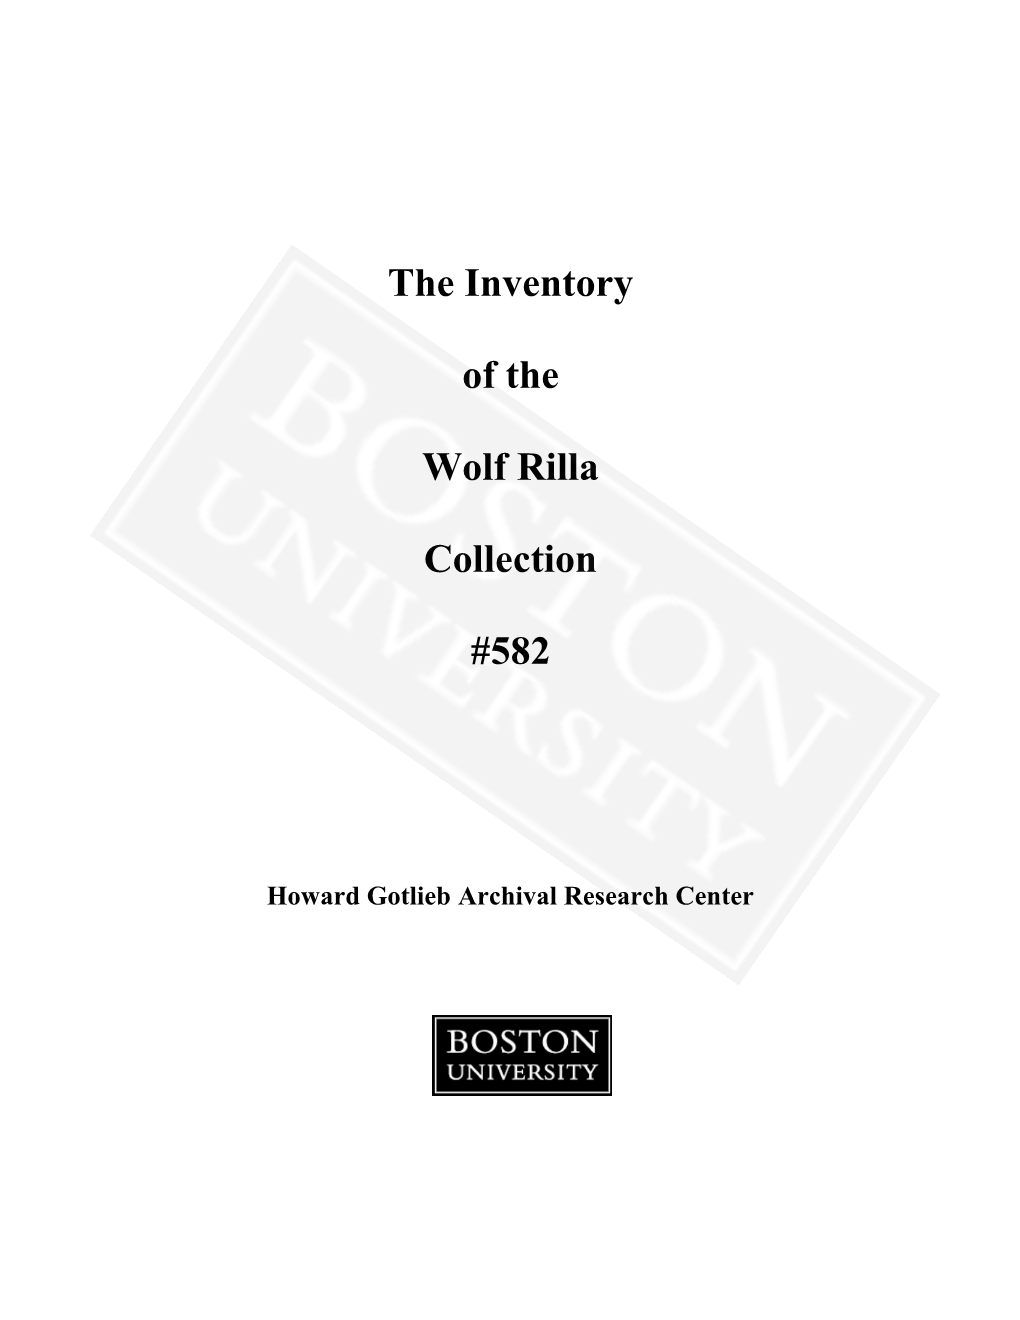 The Inventory of the Wolf Rilla Collection #582